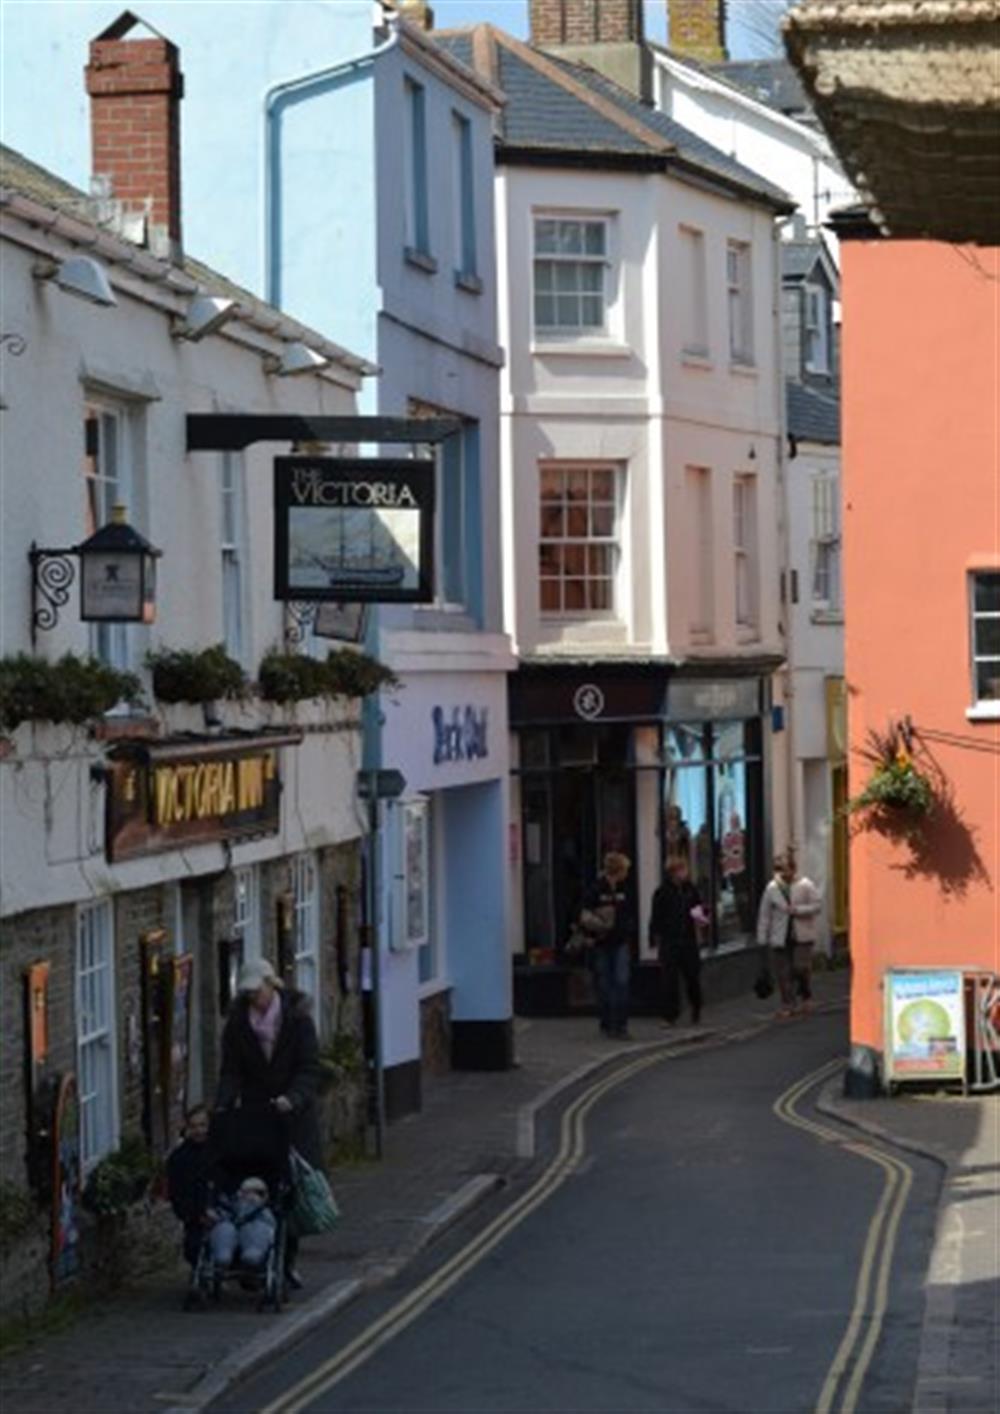 Fore Street with a number of pubs and restaurants is just a short walk from the property